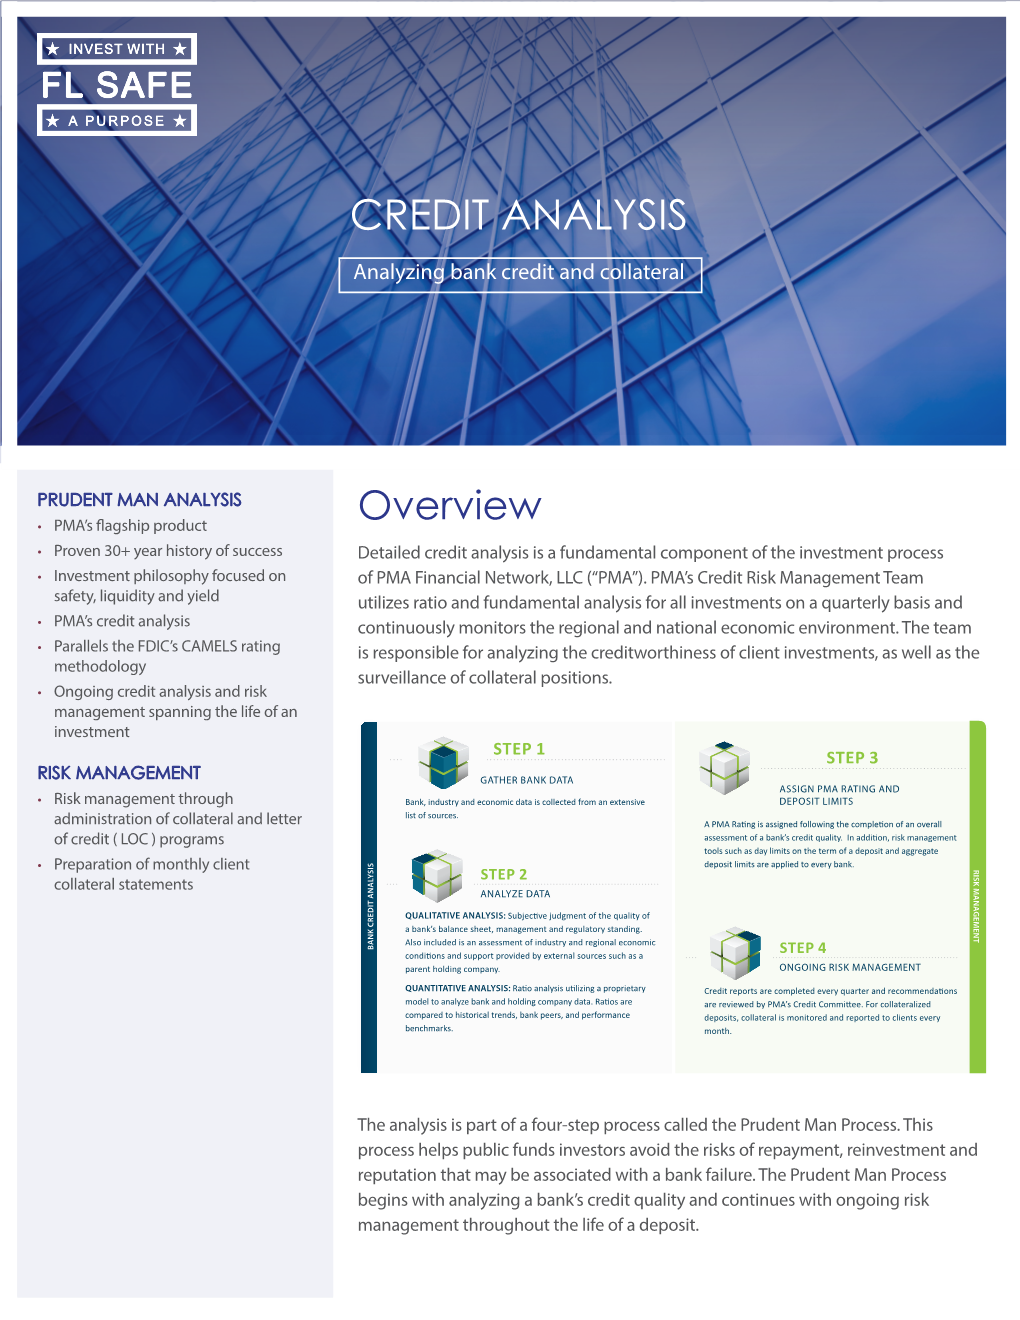 CREDIT ANALYSIS Analyzing Bank Credit and Collateral